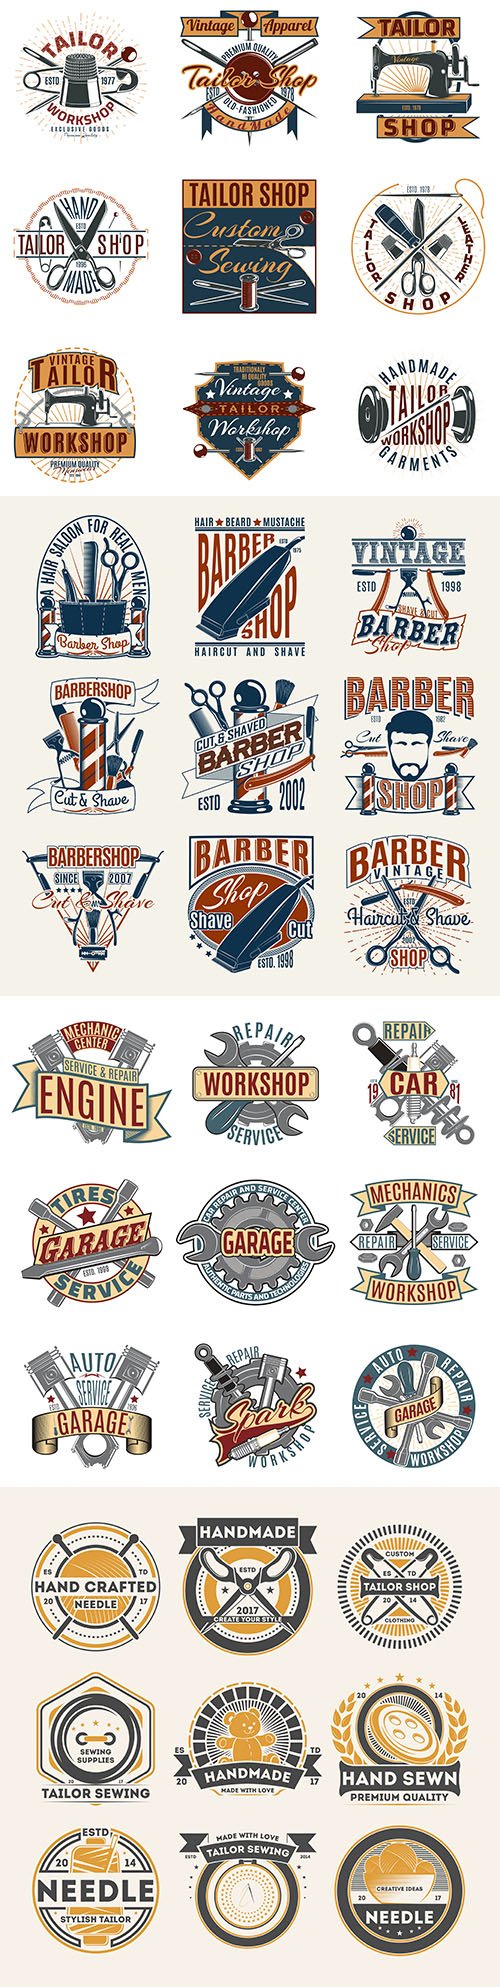 Vintage antique emblems and logos with text design